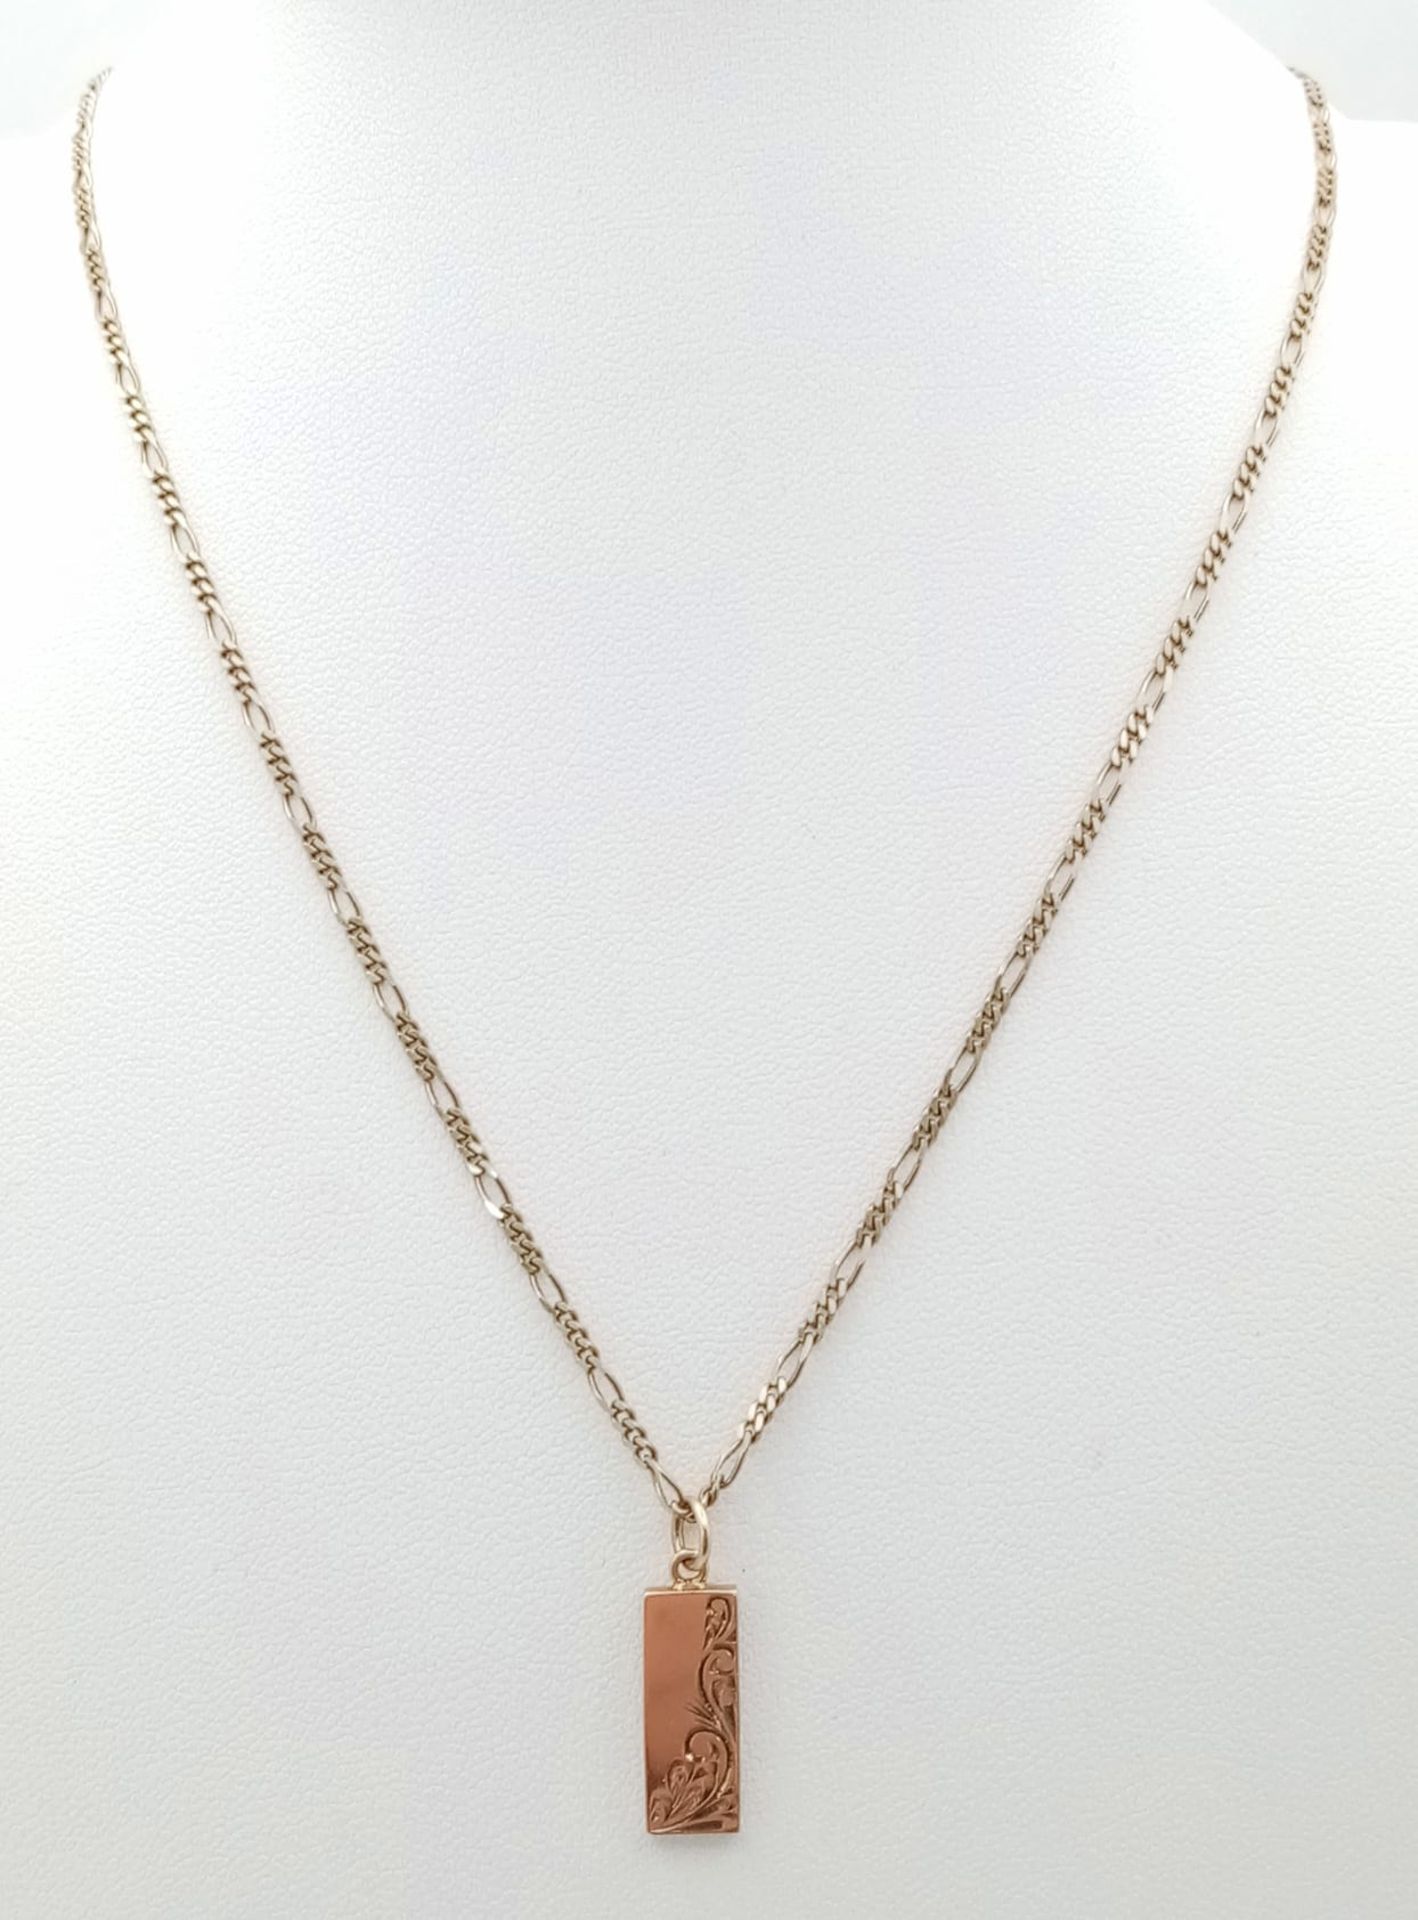 A PATTERNED GOLD INGOT AND ON A 40cms GOLD CHAIN ALL IN 9K GOLD 4.8gms - Bild 2 aus 5